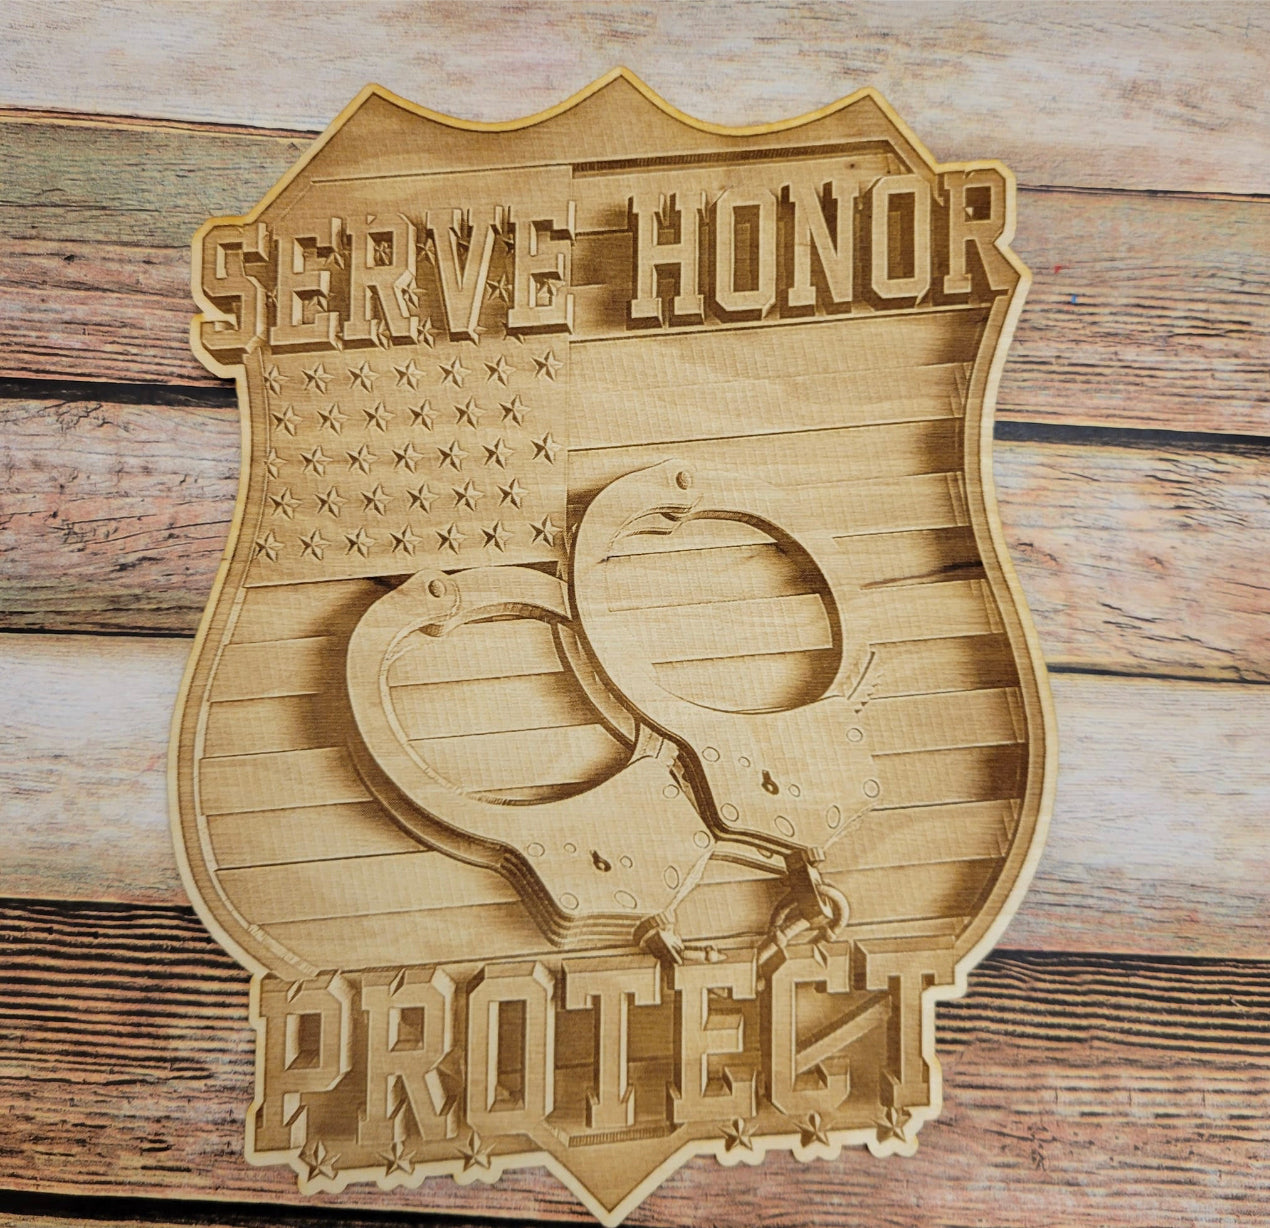 Police Law Enforcement Shield, Wood Engraved